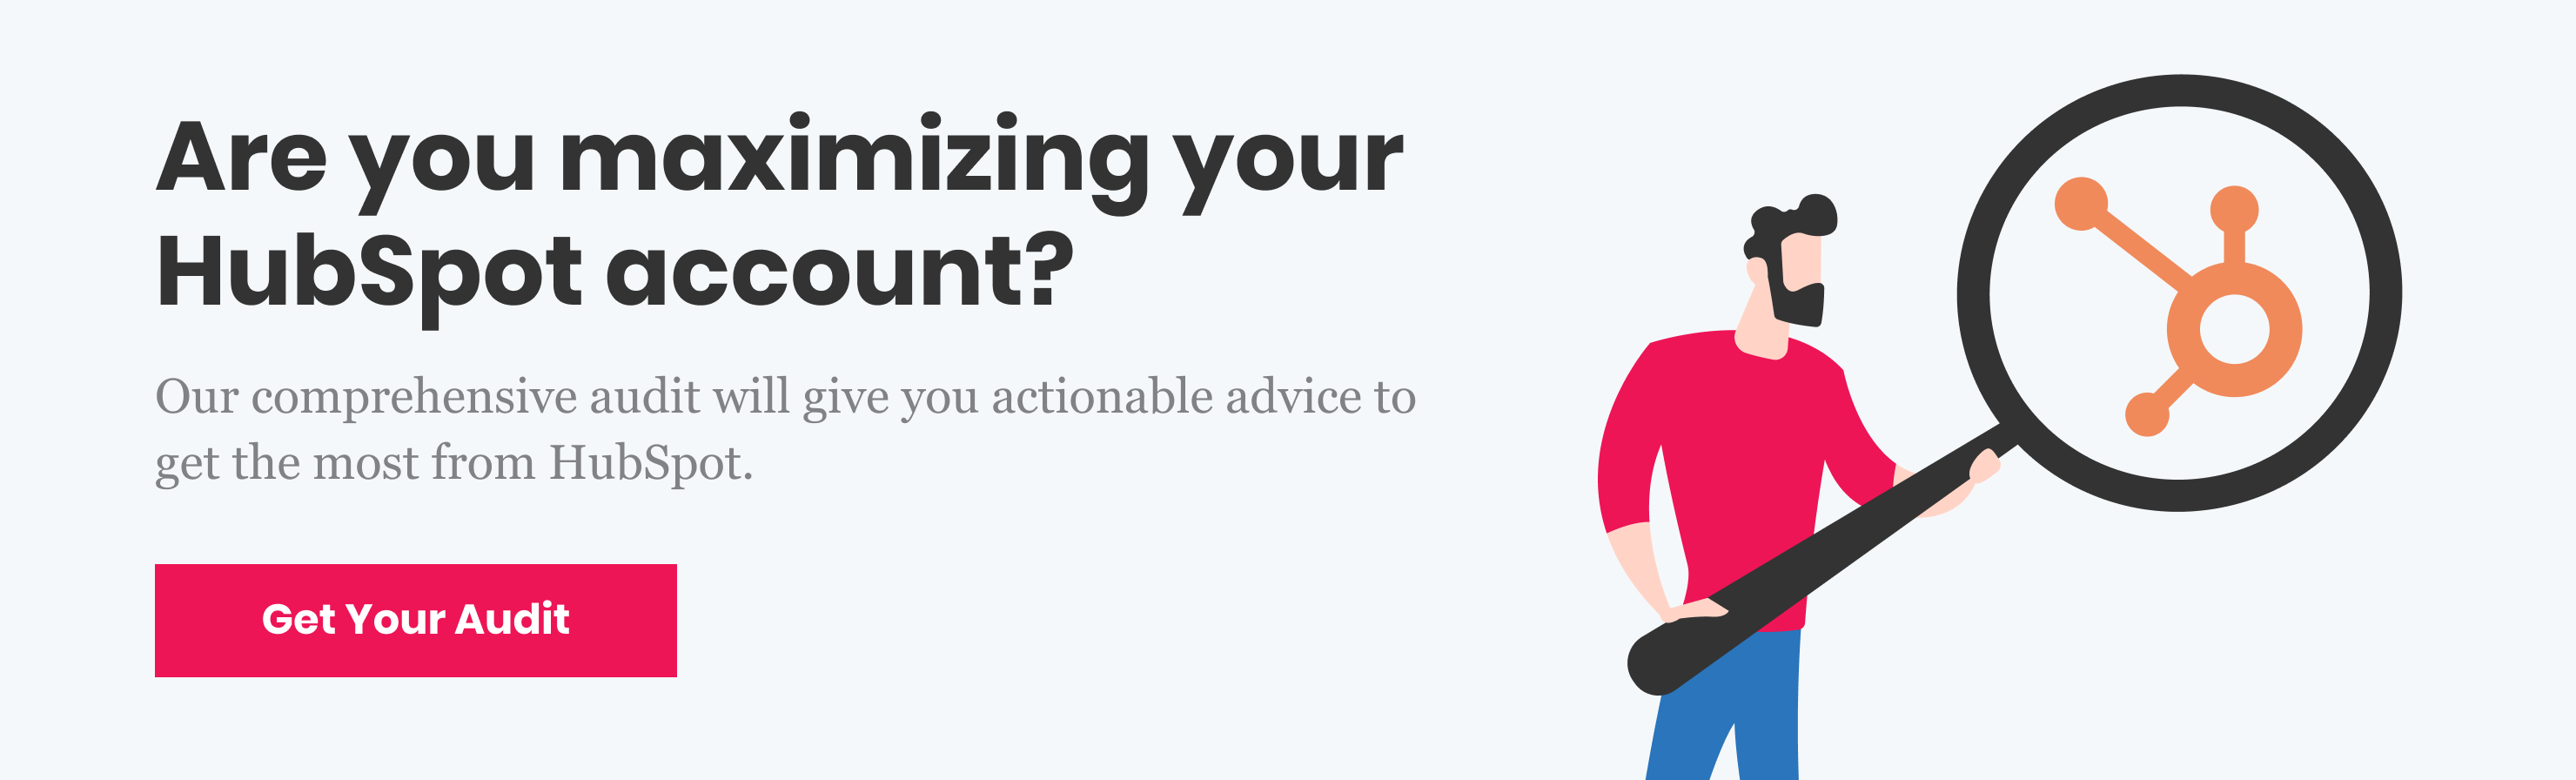 Are you maximizing your HubSpot account? Get a comprehensive audit